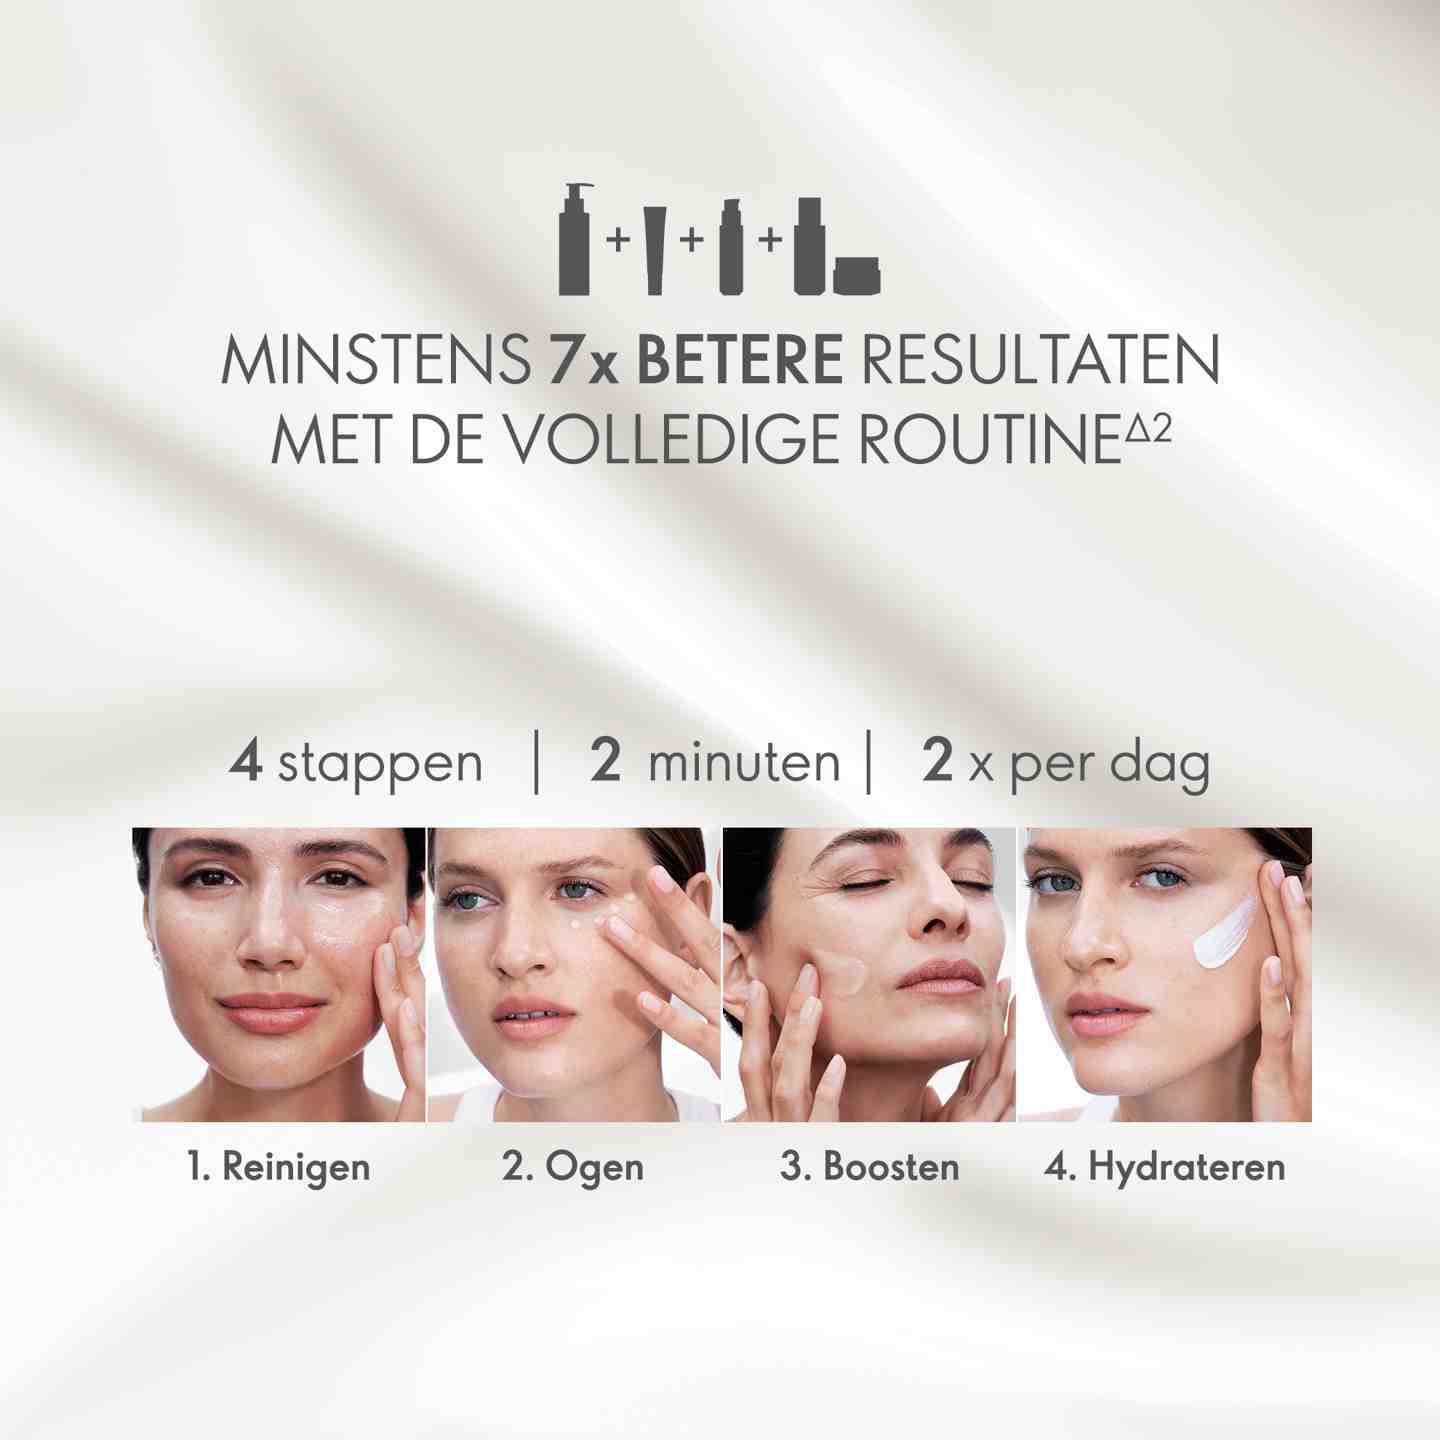 https://media-cdn.oriflame.com/productImage?externalMediaId=product-management-media%2fProducts%2f45595%2fNL%2f45595_5.png&id=17563700&version=1